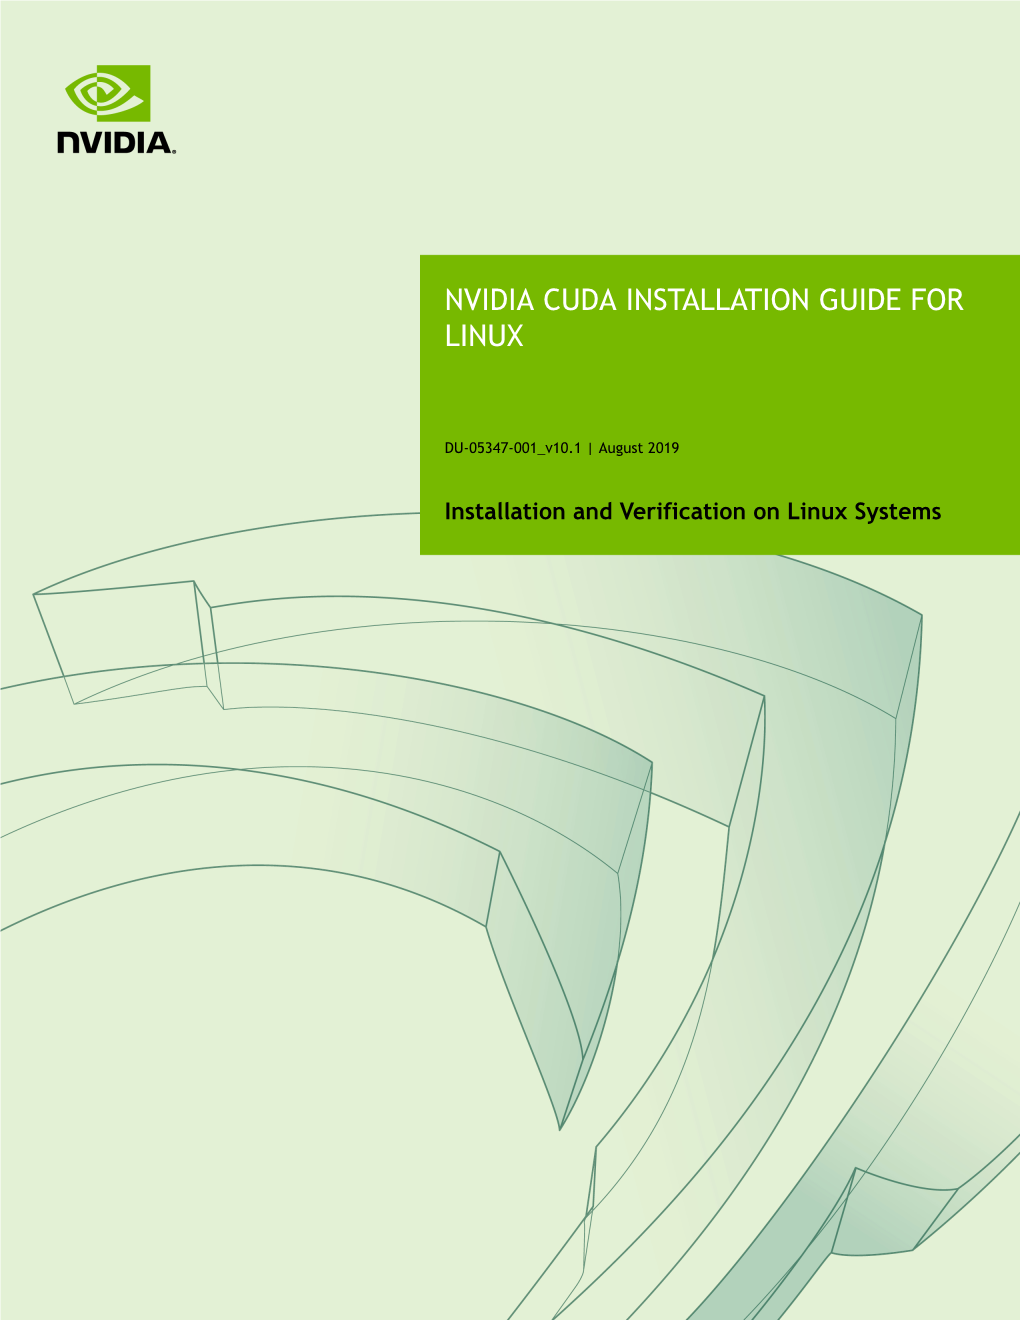 Nvidia Cuda Installation Guide for Linux